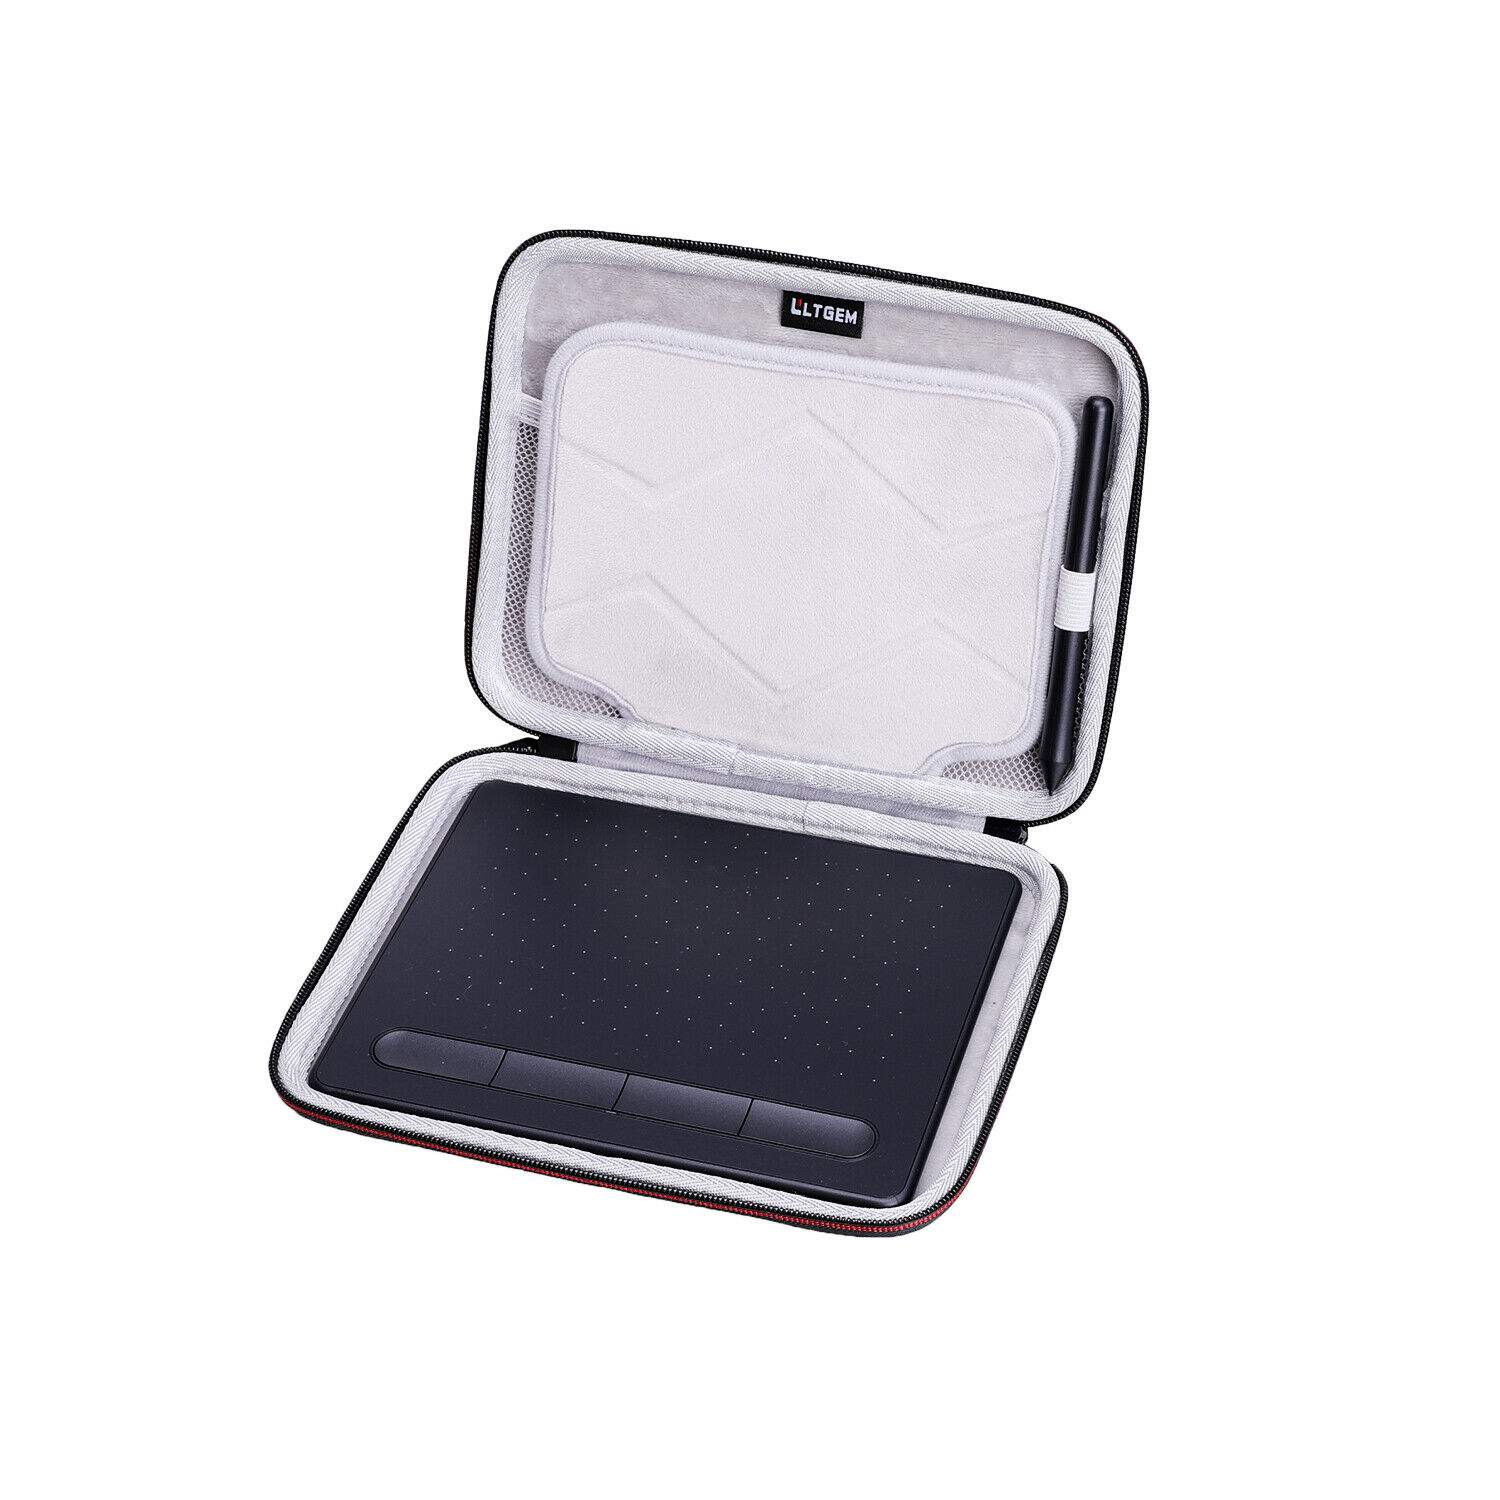 LTGEM Carrying Case for Wacom CTL4100 Intuos Graphics Drawing Tablet (Case Only)